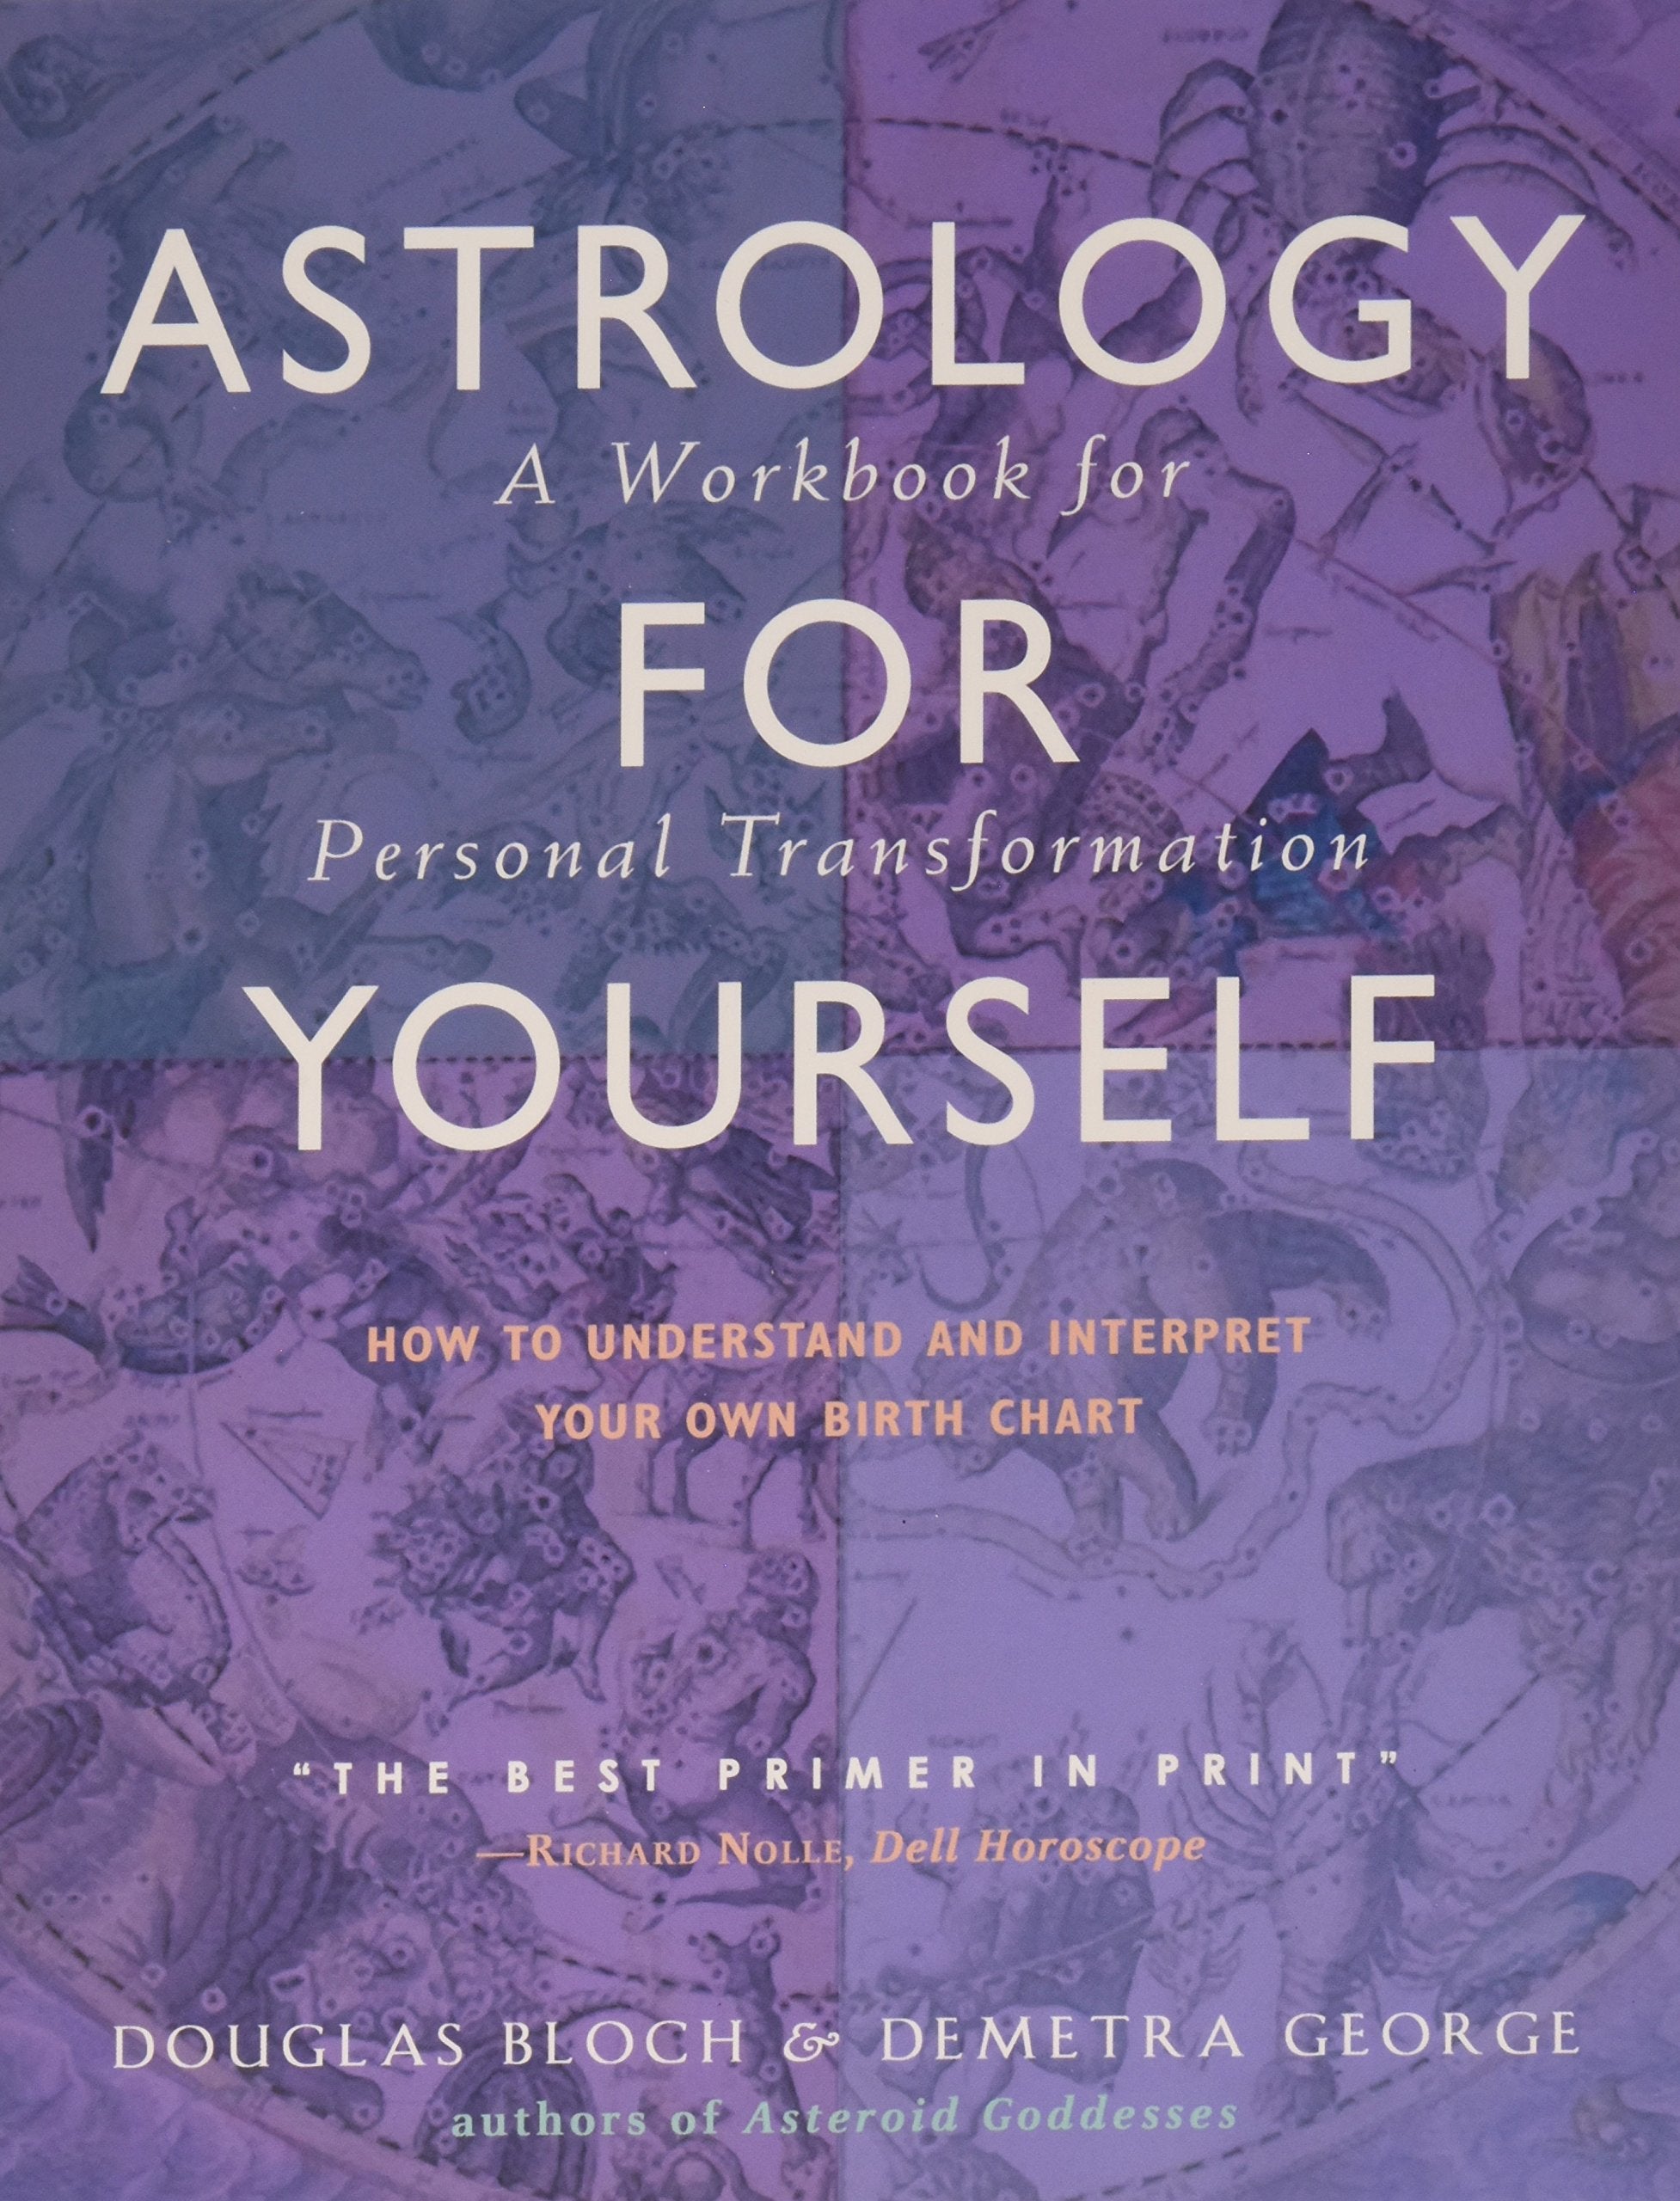 Astrology for Yourself How to Understand and Interpret Your Own Birth Chart A Workbook for Personal Transformation (Workbook) - SureShot Books